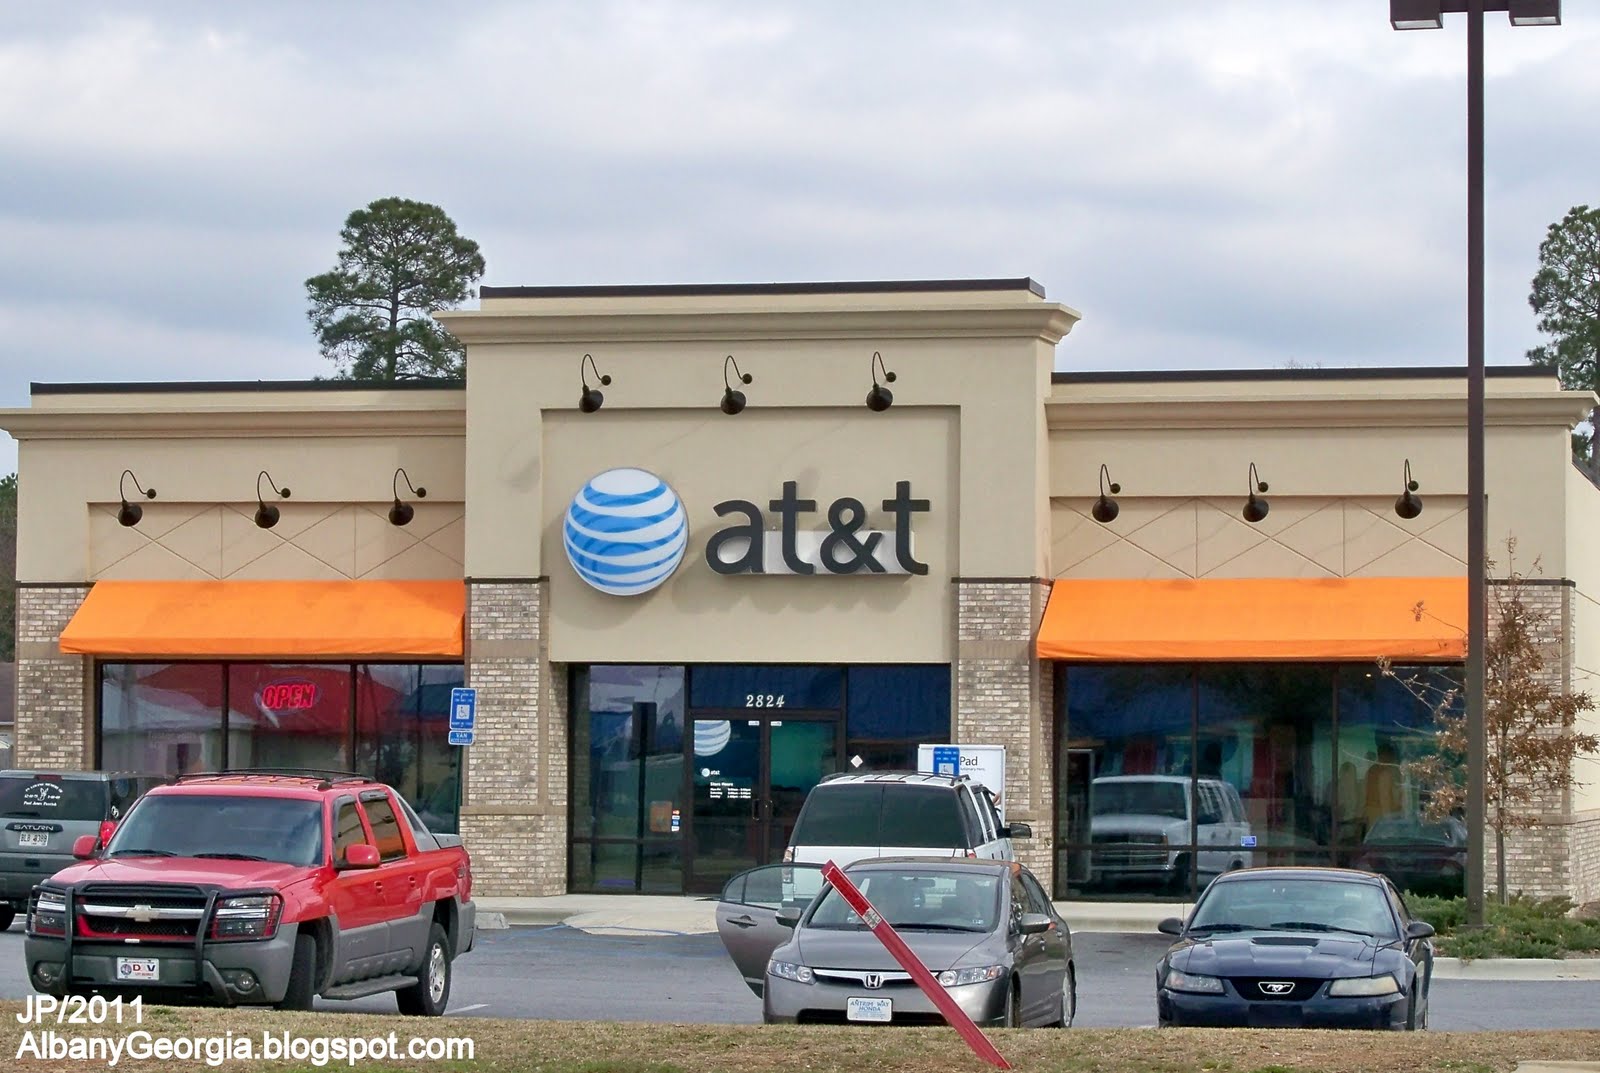 AT&T WIRELESS STORE ALBANY GEORGIA Nottingham Way,AT&T Cell Phone Wireless Service Albany GA..JPG